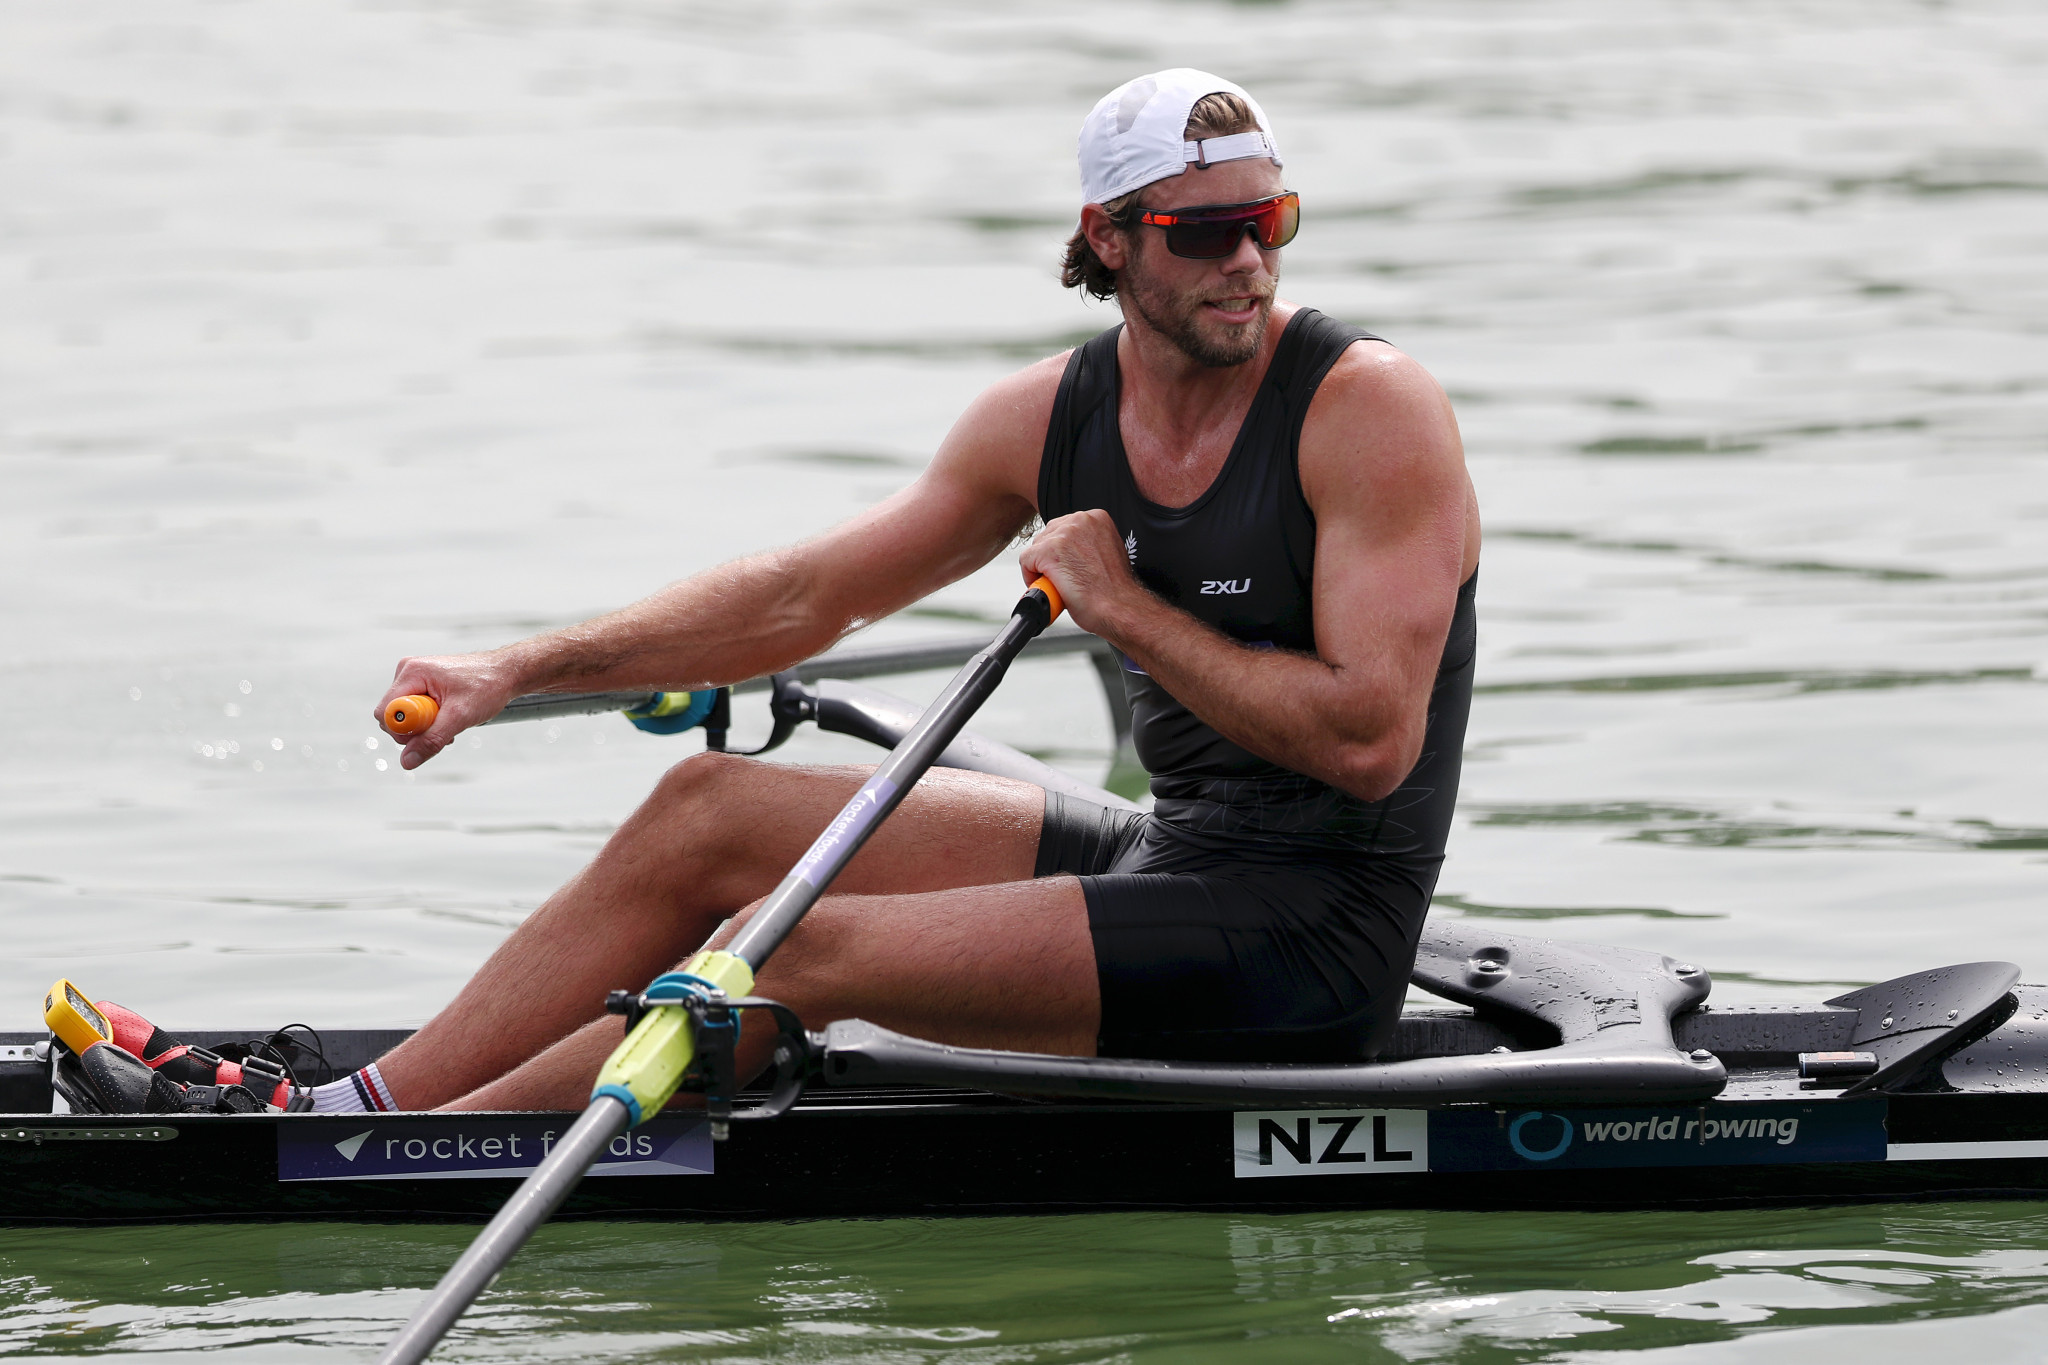 Sculler Robbie Manson has forced his way back into the New Zealand squad with a series of impressive performances at the National Championships ©Getty Images